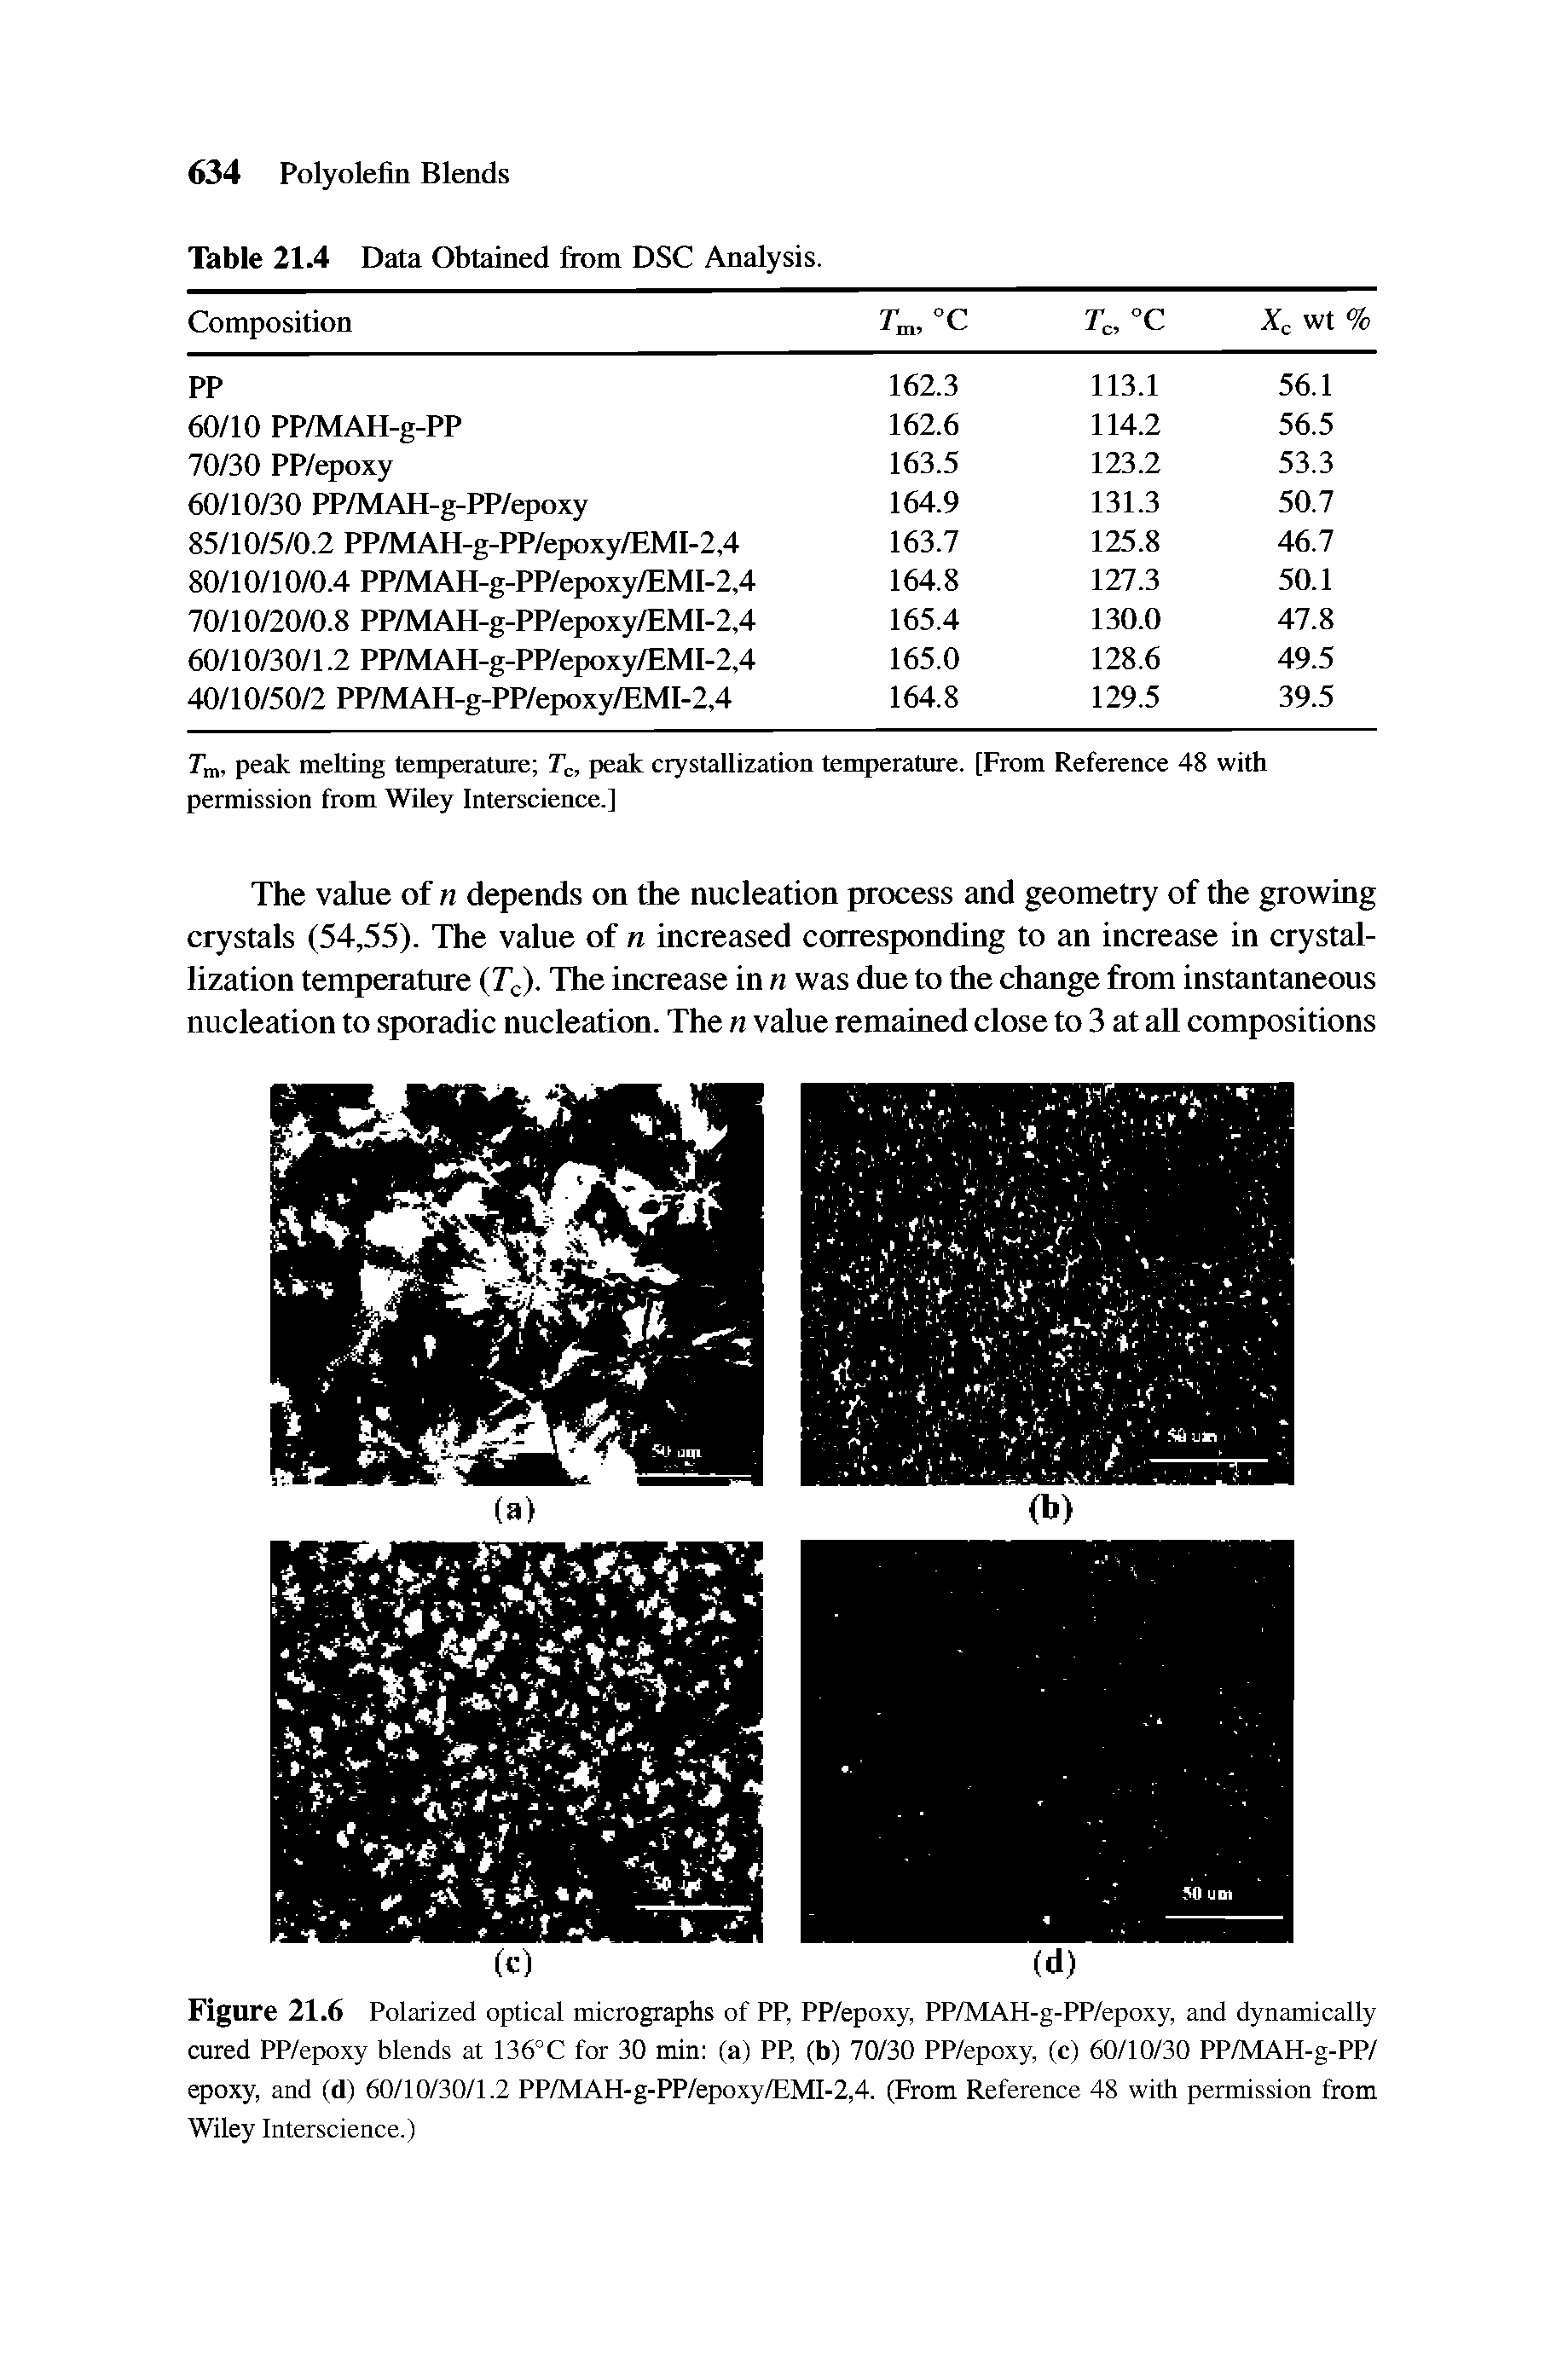 Figure 21.6 Polarized optical micrographs of PP, PP/epoxy, PP/MAH-g-PP/epoxy, and dynamically cured PP/epoxy blends at 136"C for 30 min (a) PP, (b) 70/30 PP/epoxy, (c) 60/10/30 PP/MAH-g-PP/ epoxy, and (d) 60/10/30/1.2 PP/MAH-g-PP/epoxy/EMI-2,4. (From Reference 48 with permission from Wiley Interscience.)...